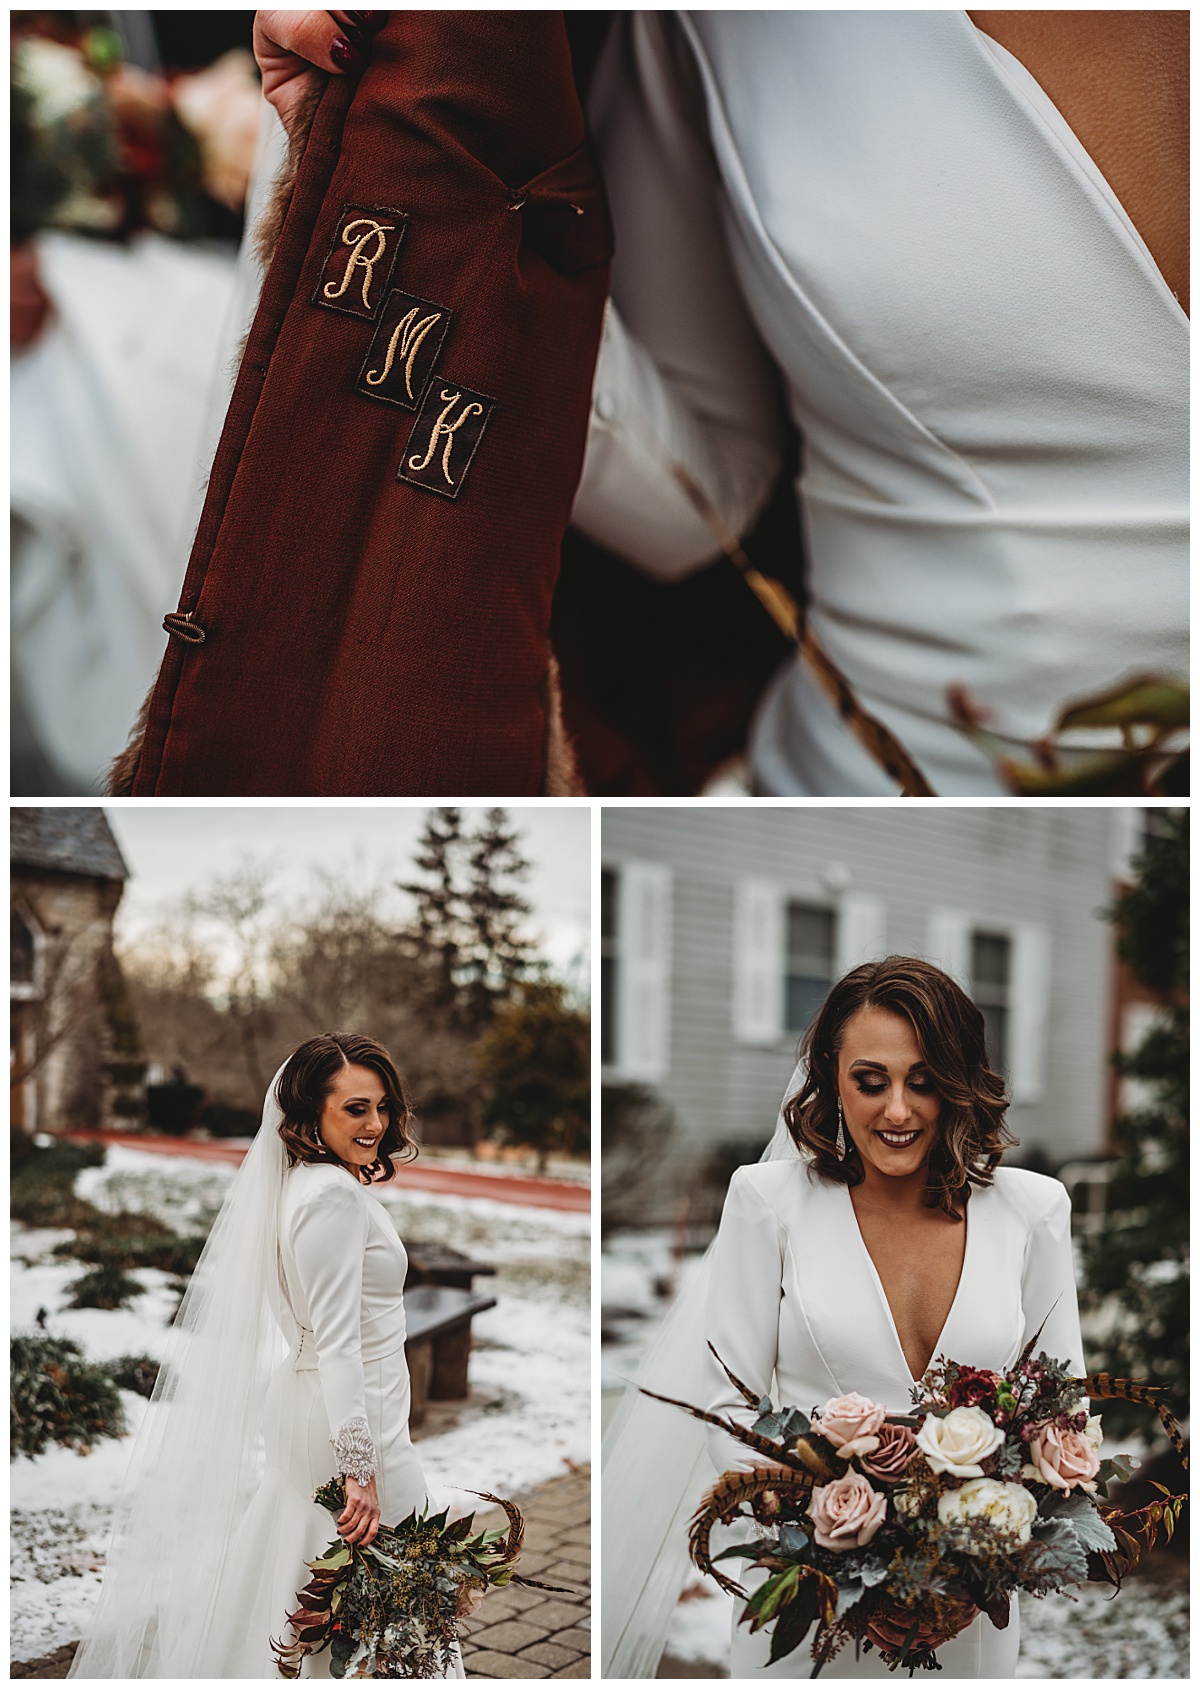 Bridal portraits for a moody winter wedding in Baltimore by Brittany Dunbar Photography, a Baltimore Wedding Photographer.